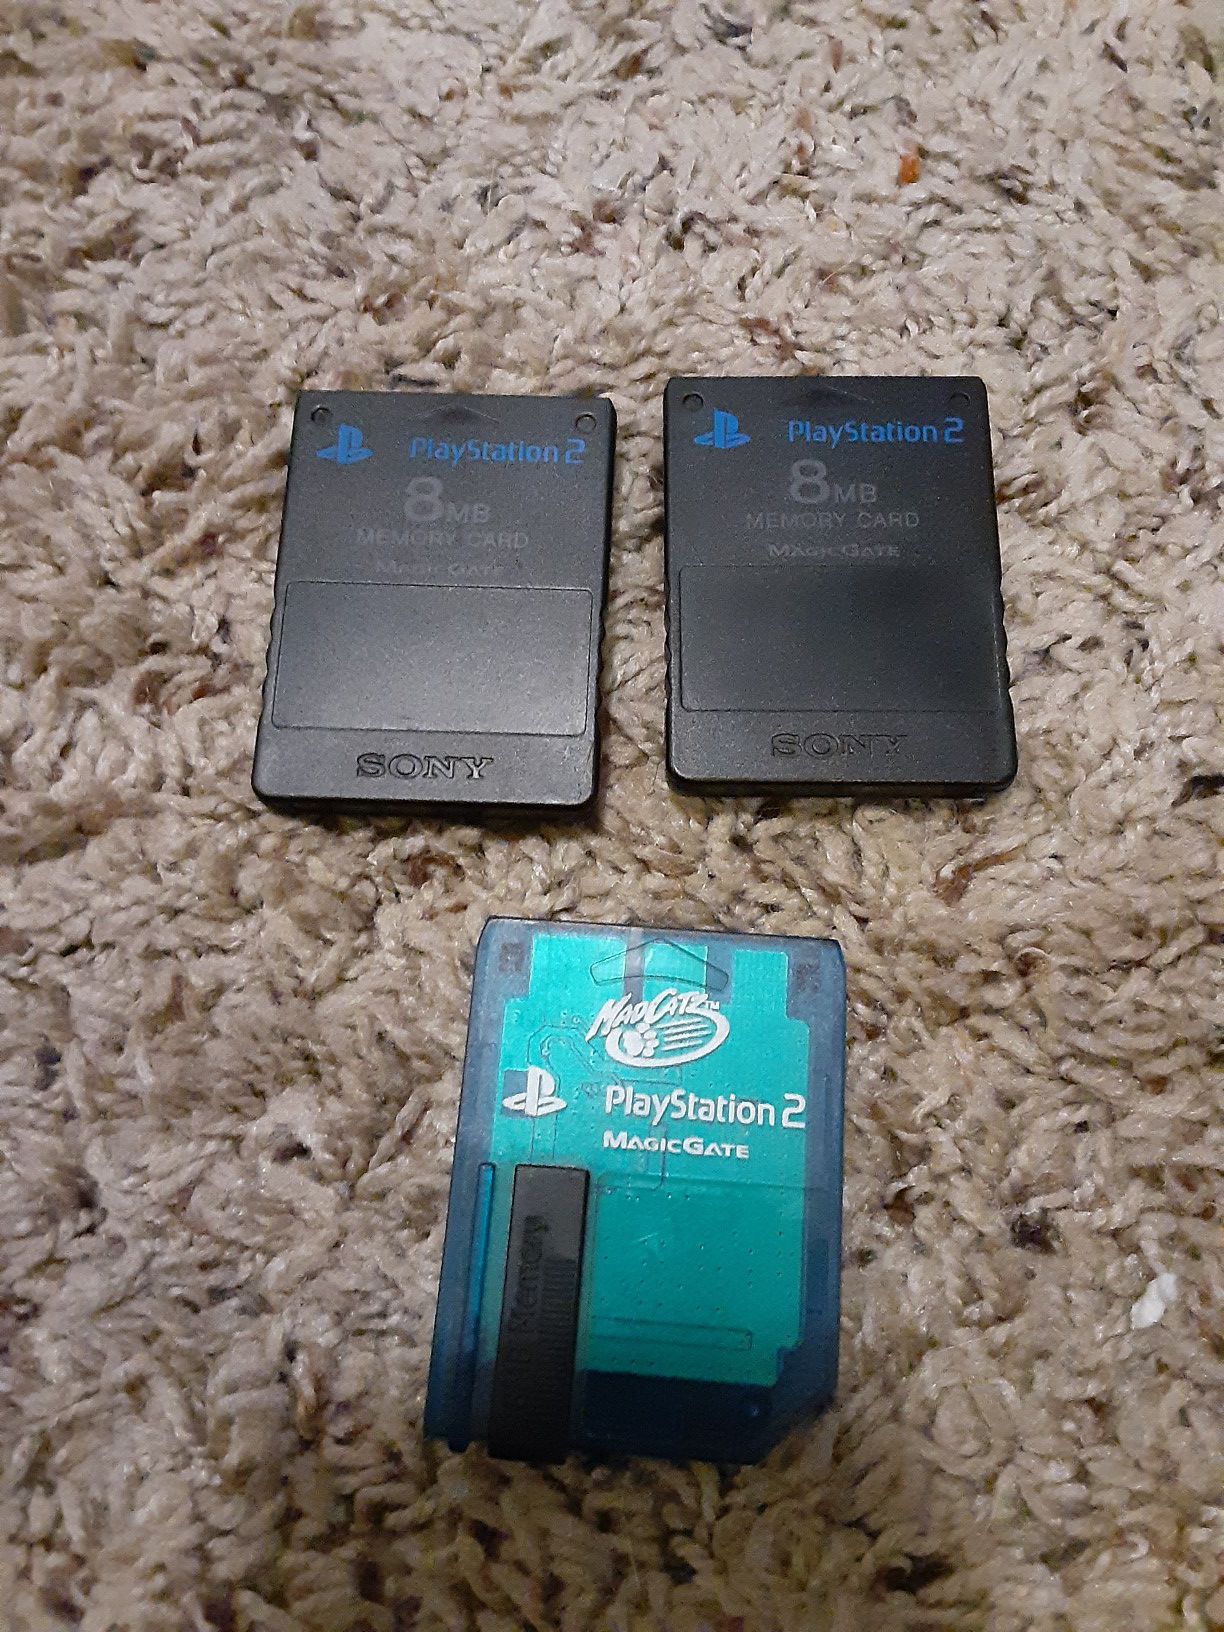 PS2 memory cards